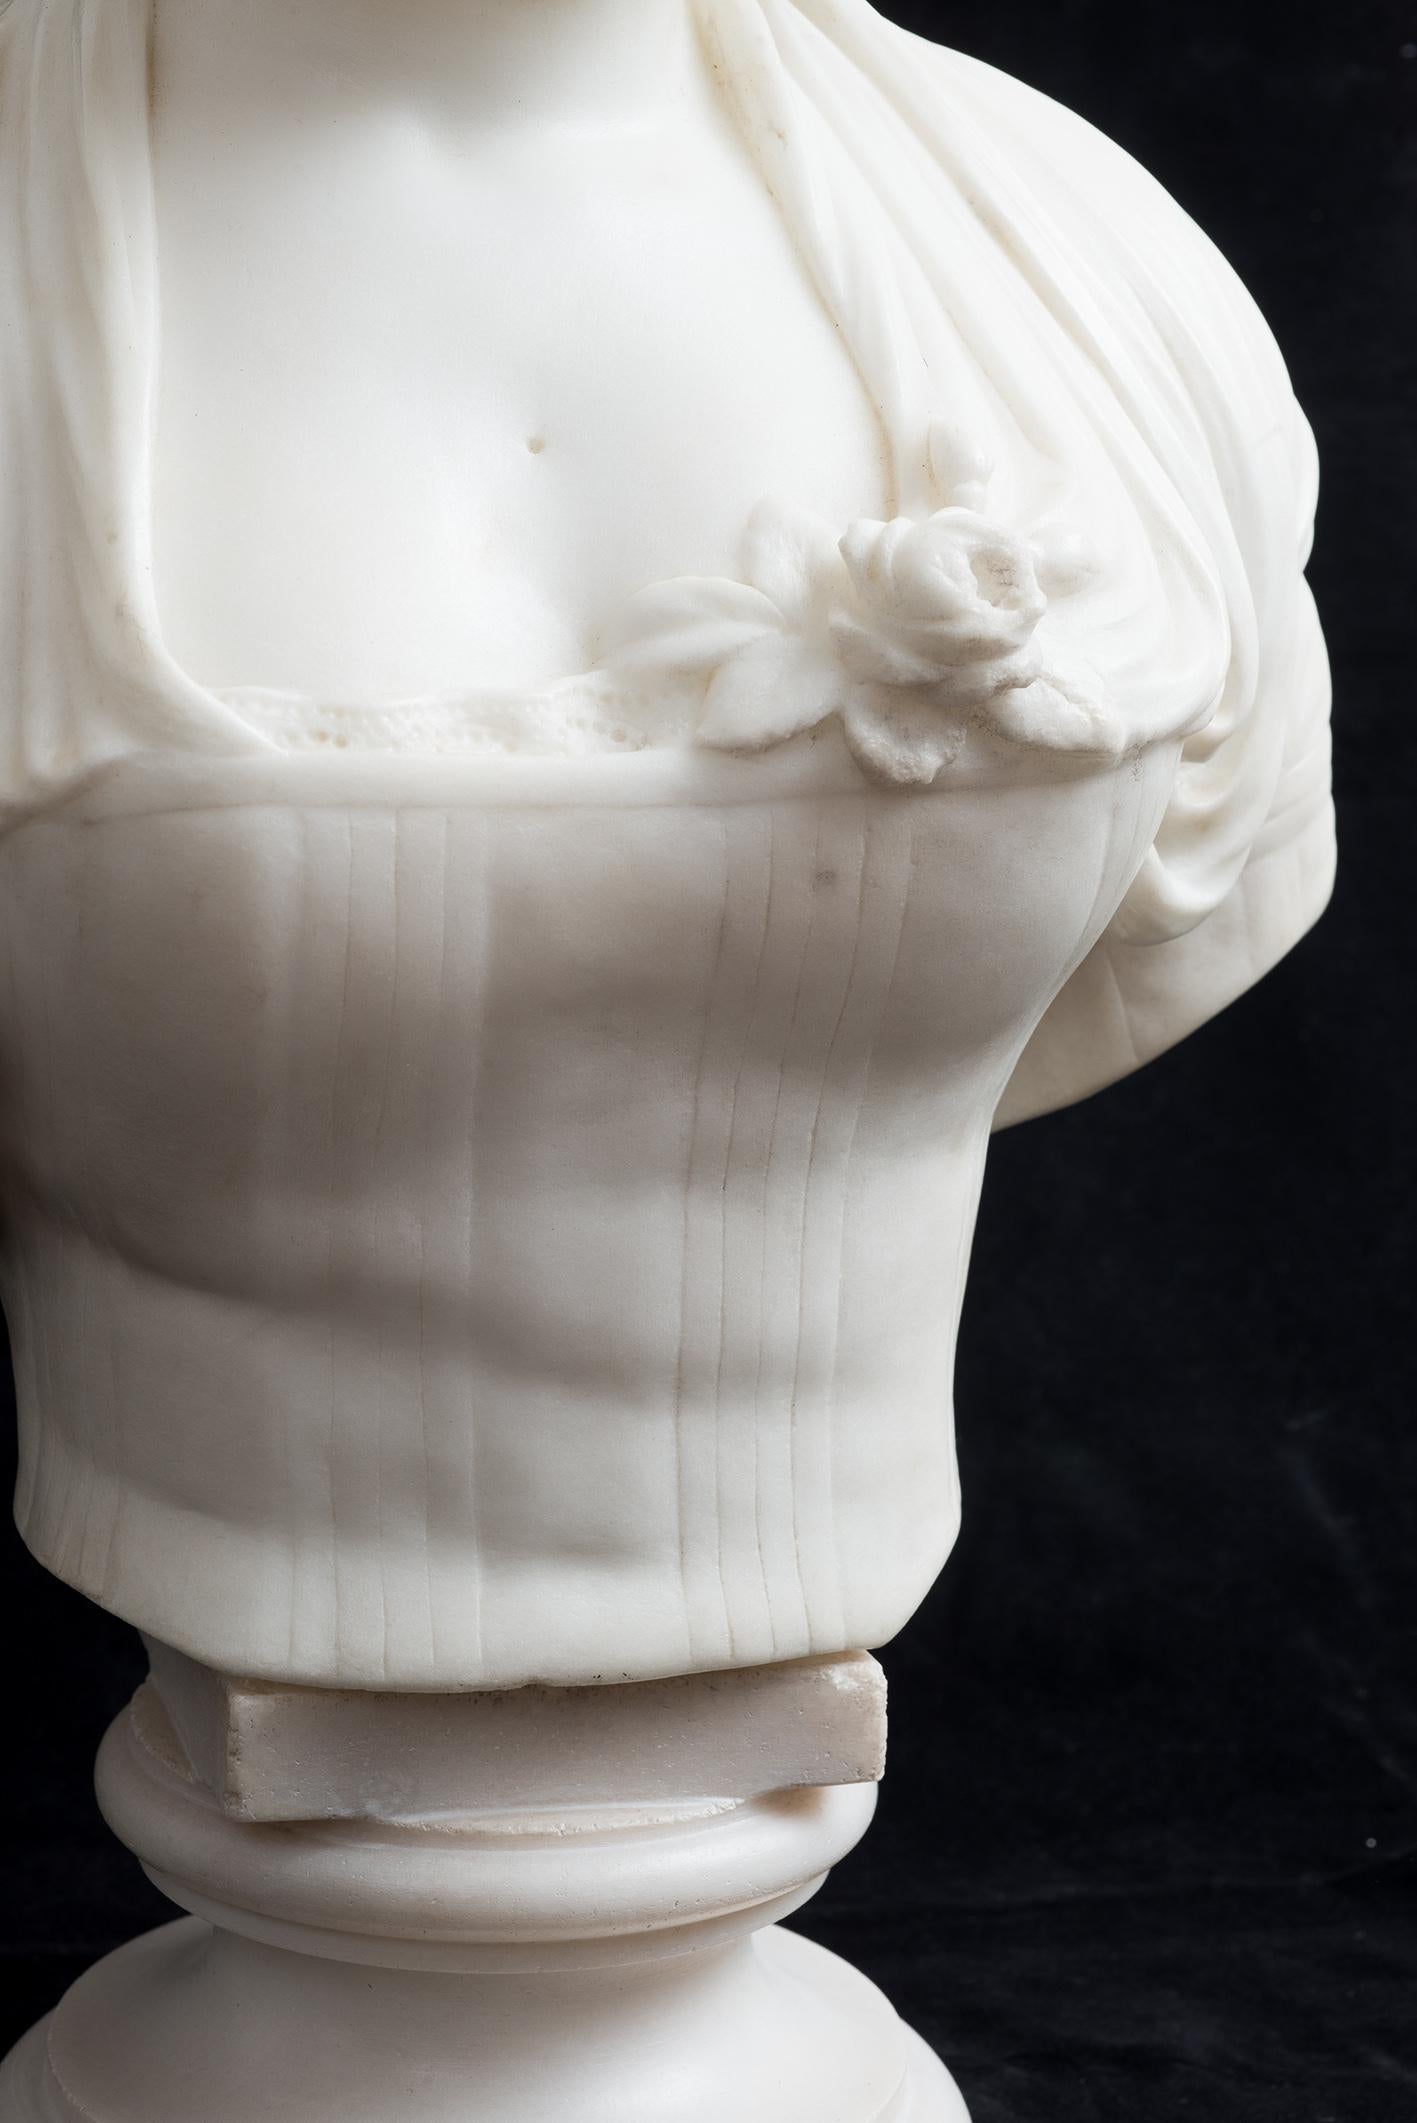 Antique French Napoleon III sculpture in white statuary marble depicting the bust of a noblewoman.

The woman is depicted in the clothing of the period and is of great value and great quality.

Magnificent patina and veining of the marble expresses